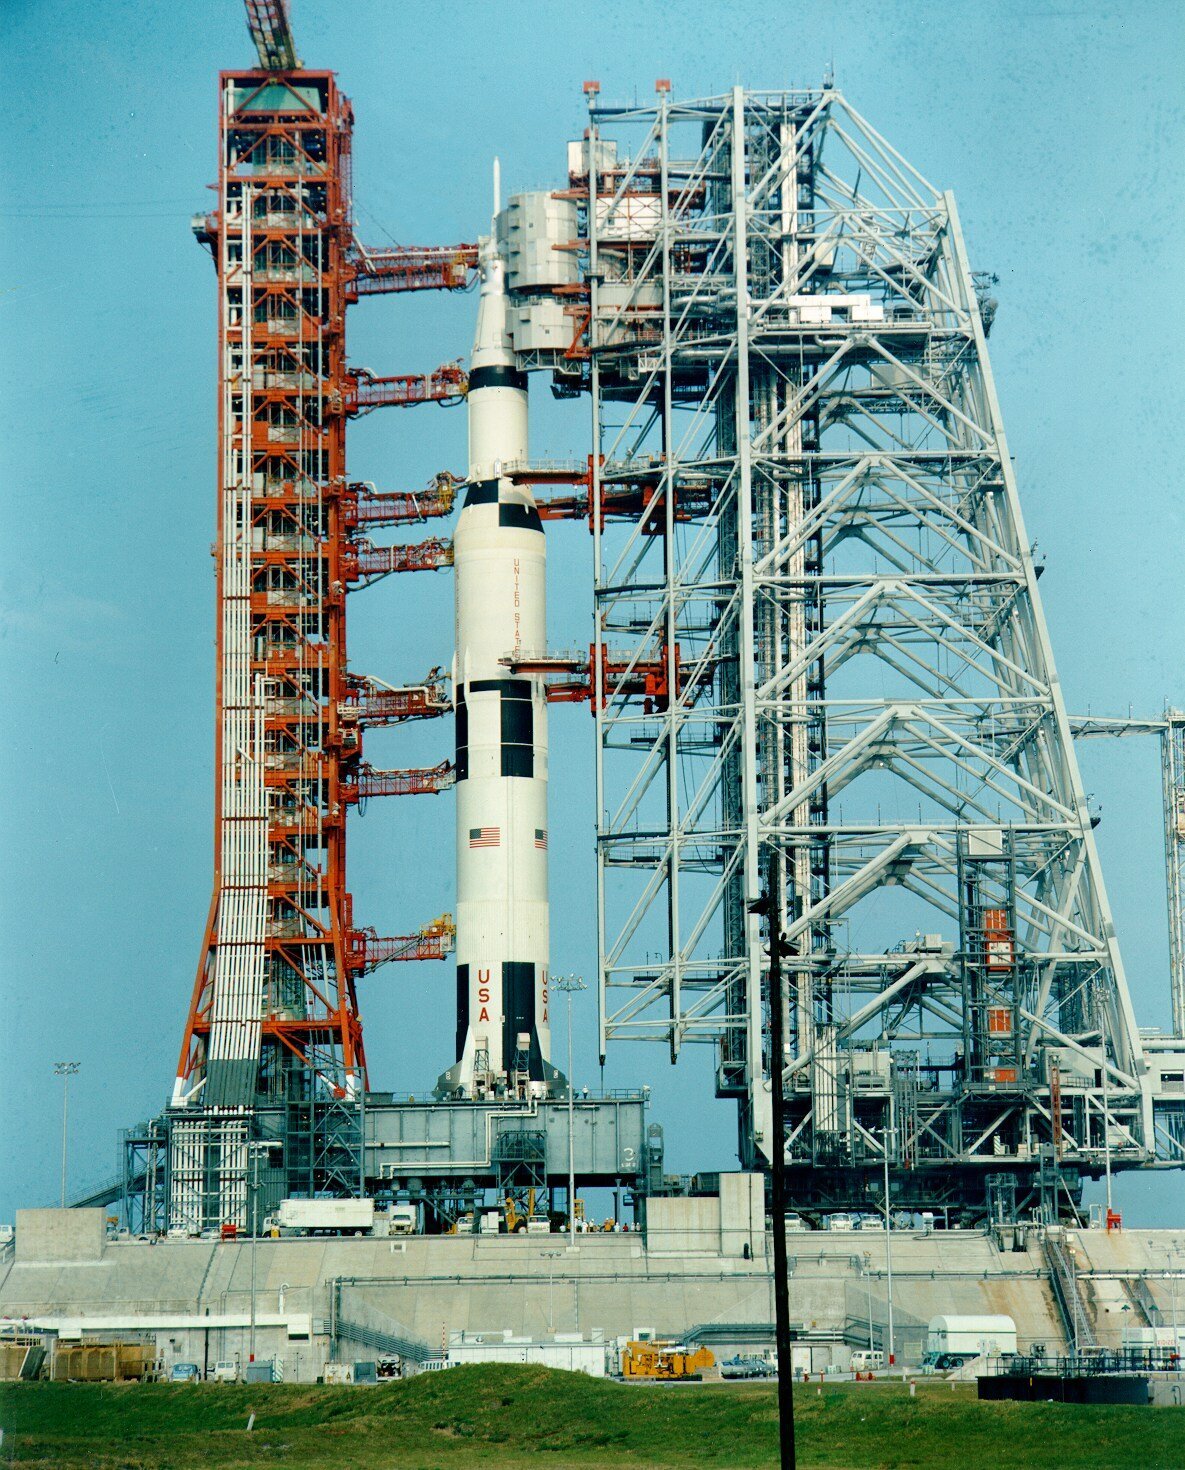 The Mobile Service Structure (right) in use to prepare the Apollo 16 Saturn Rocket for launch.